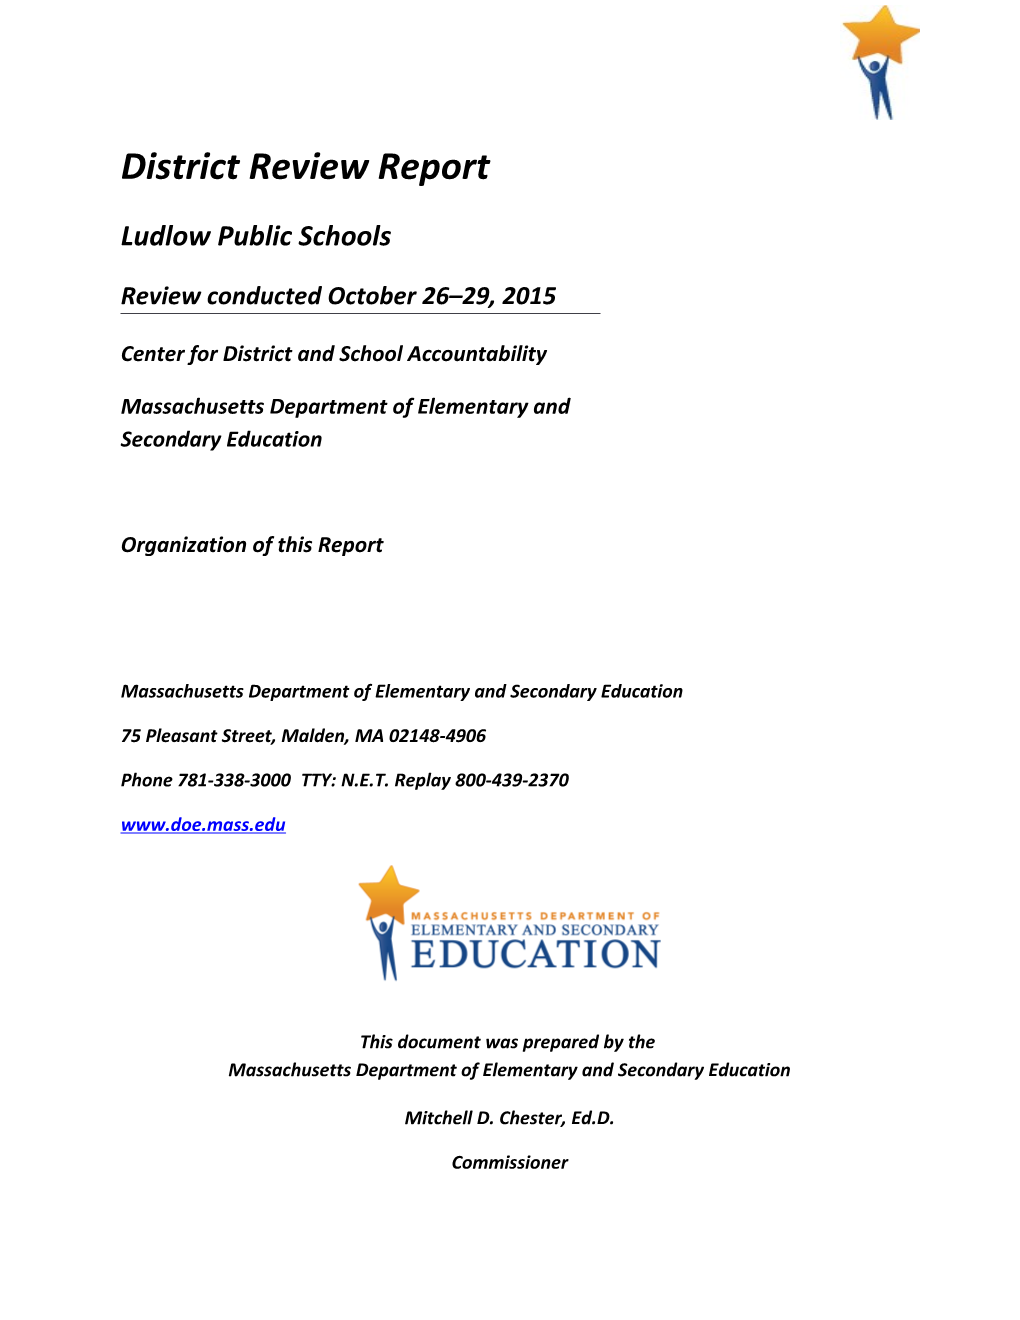 Ludlow District Review Report, 2015 Onsite